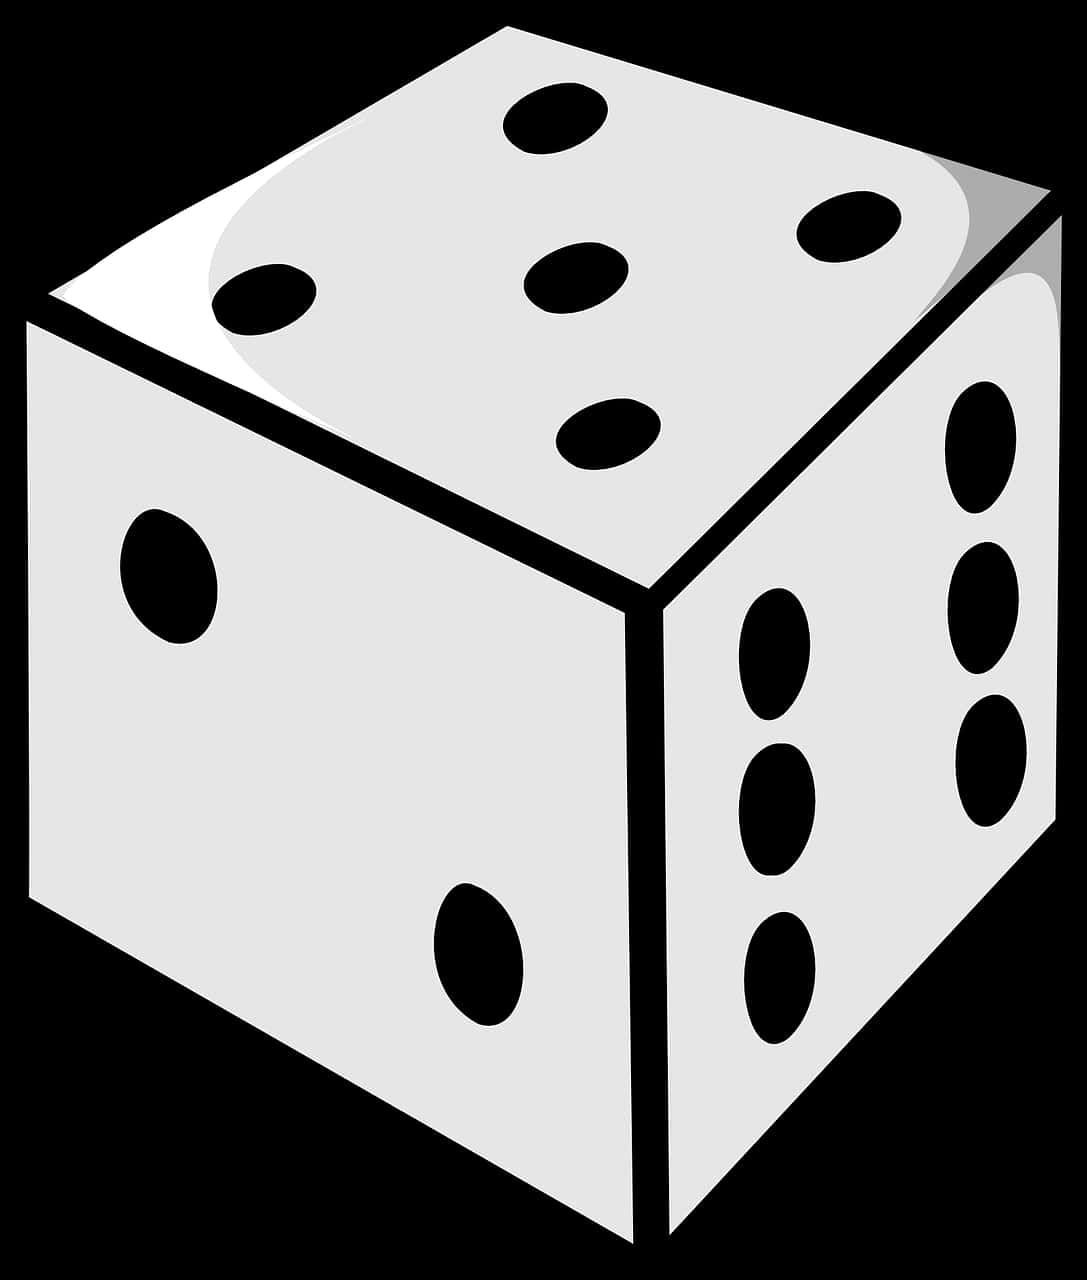 Classic Blackand White Dice Illustration PNG image